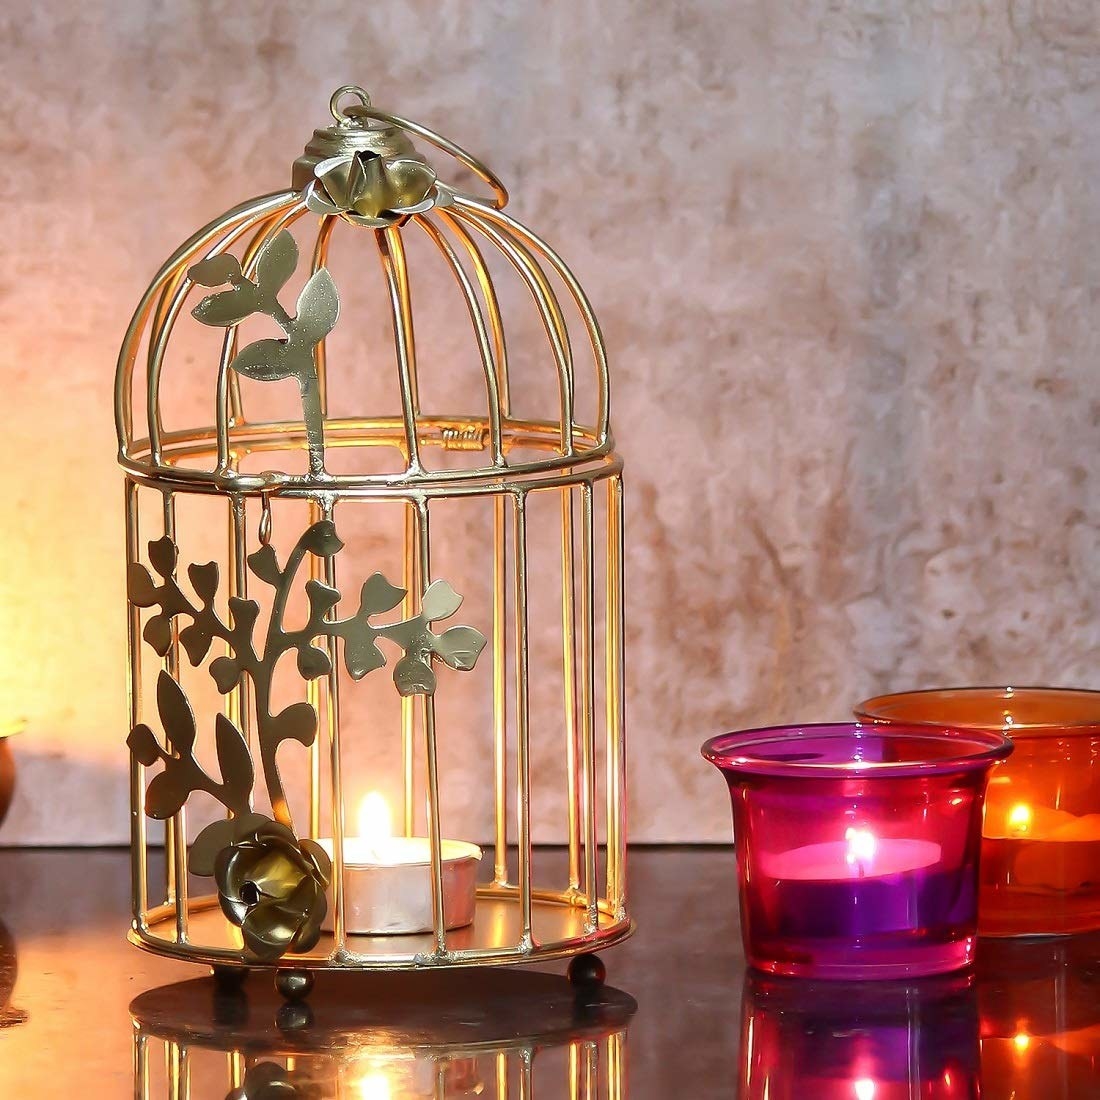 A golden birdcage with a tealight in it next to tealight holders with tealights